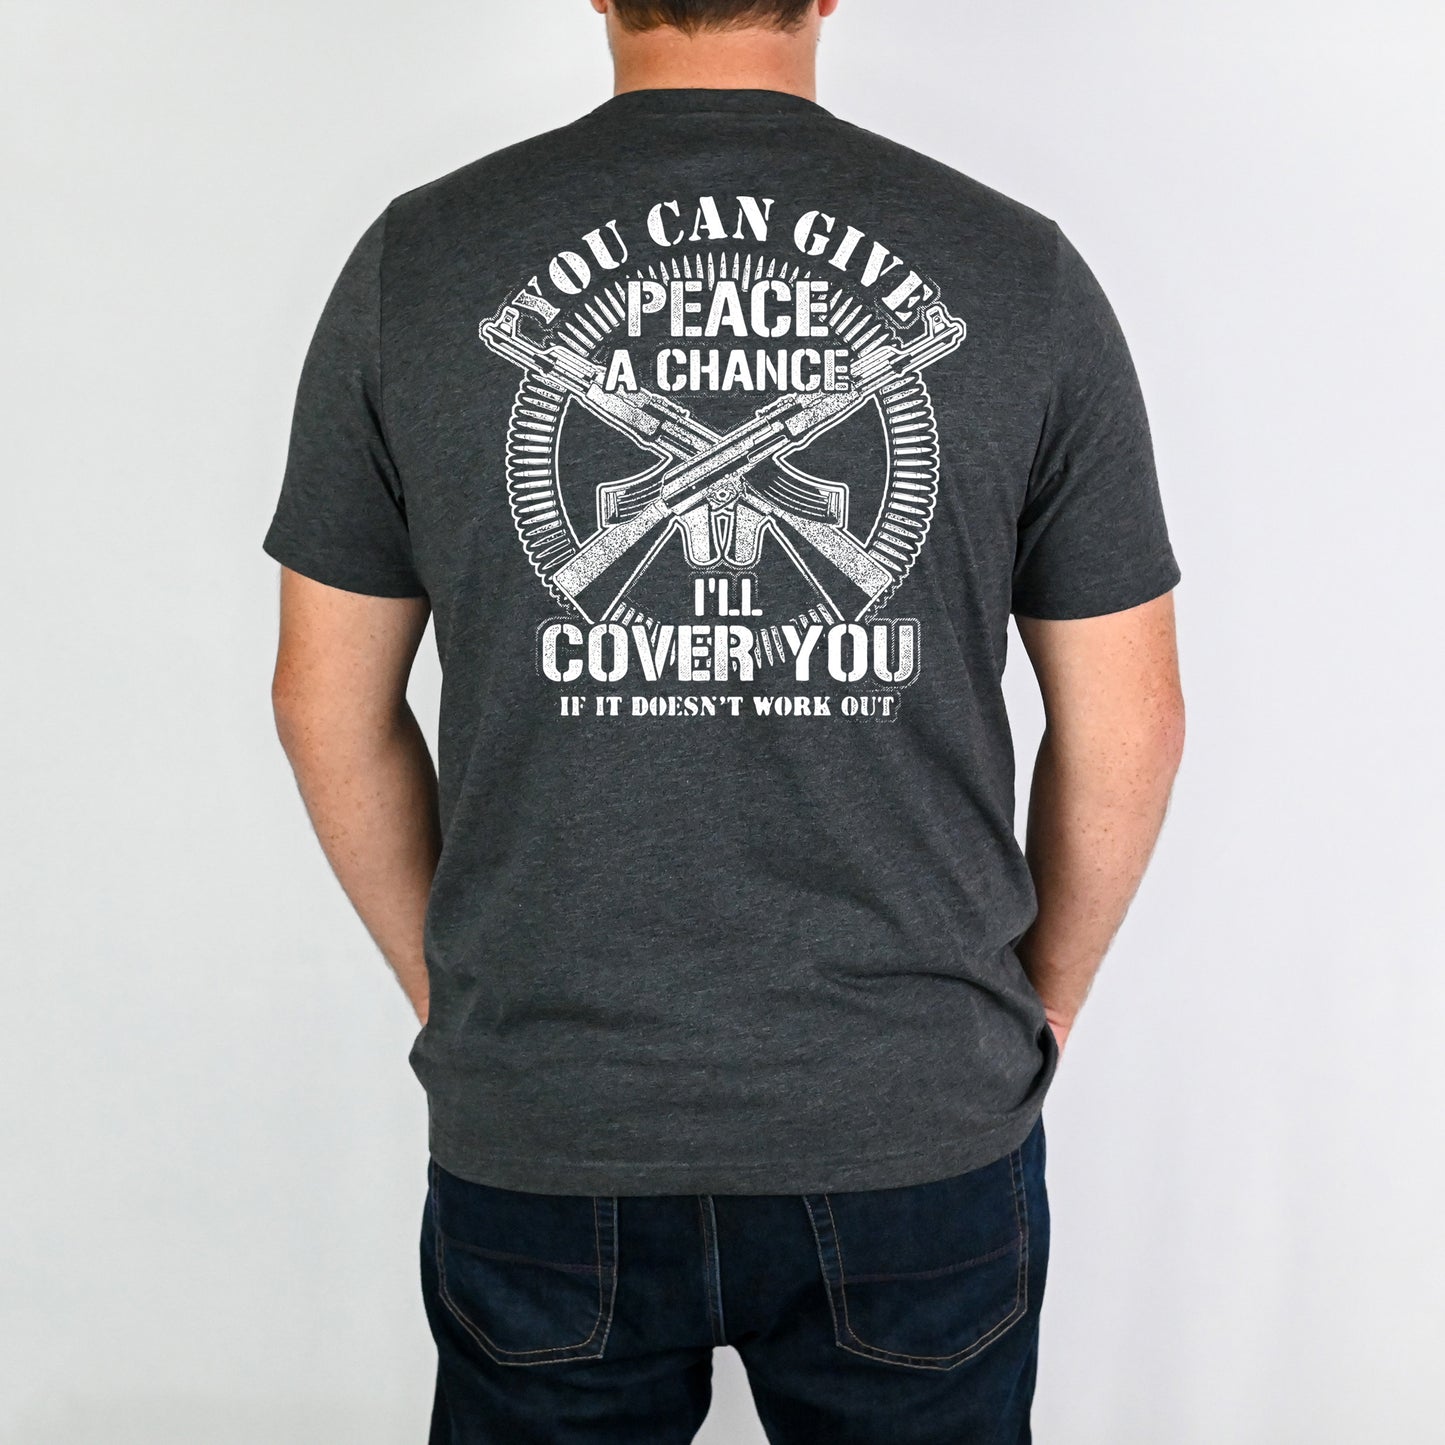 You Can Give Peace a Chance...I'll Cover You if it Doesn't Work Out- Single Color (white)- 11" wide Plastisol Screen Print Transfer